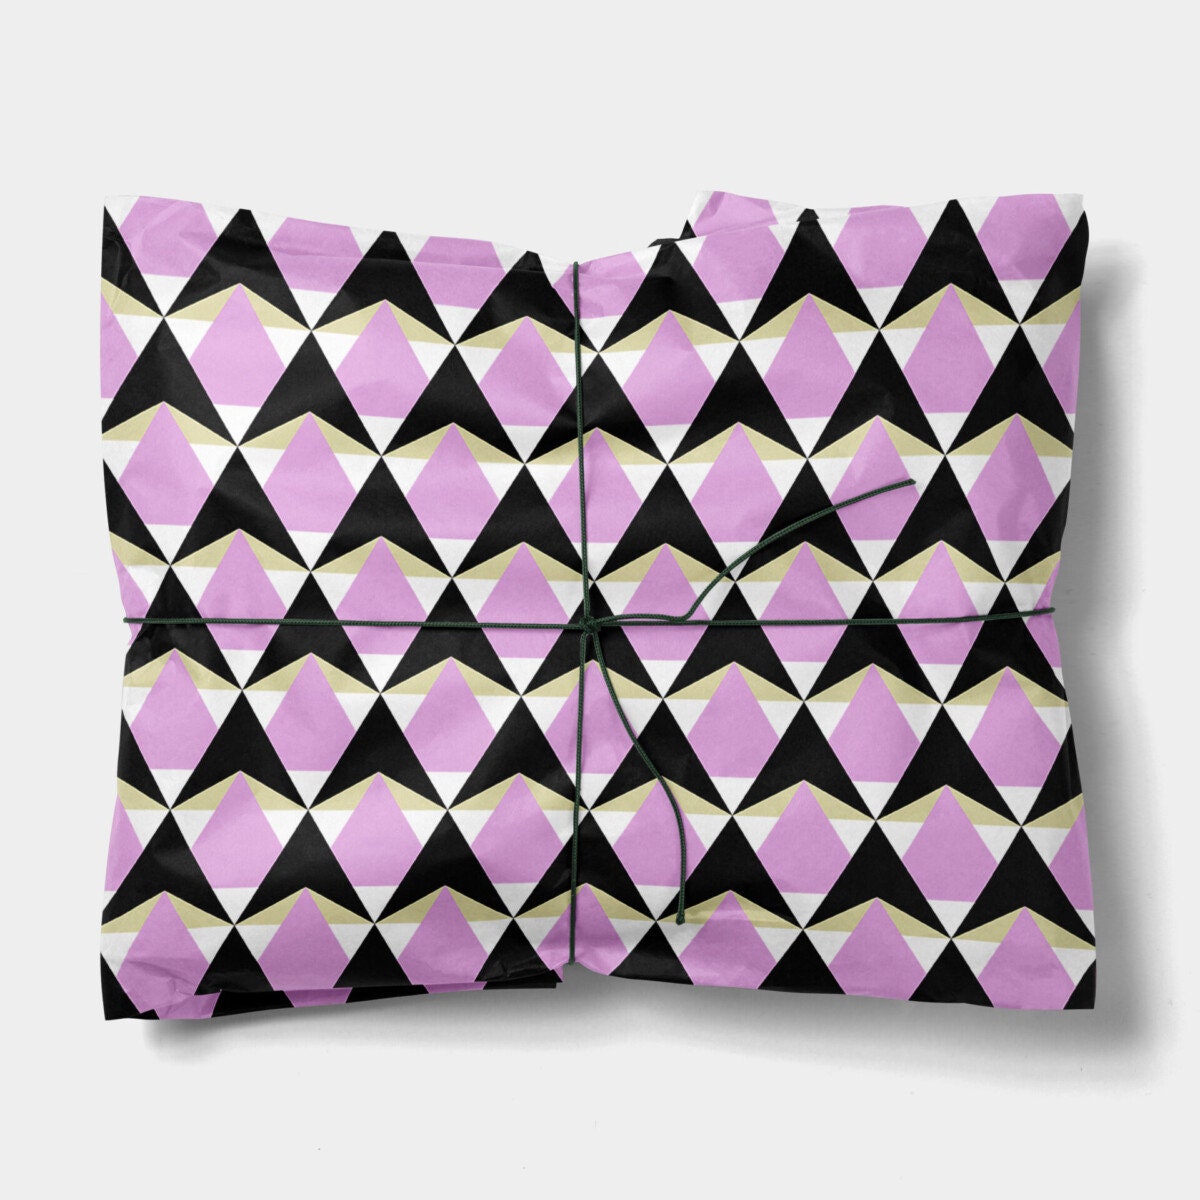 Geo Shapes XX, Surface Design